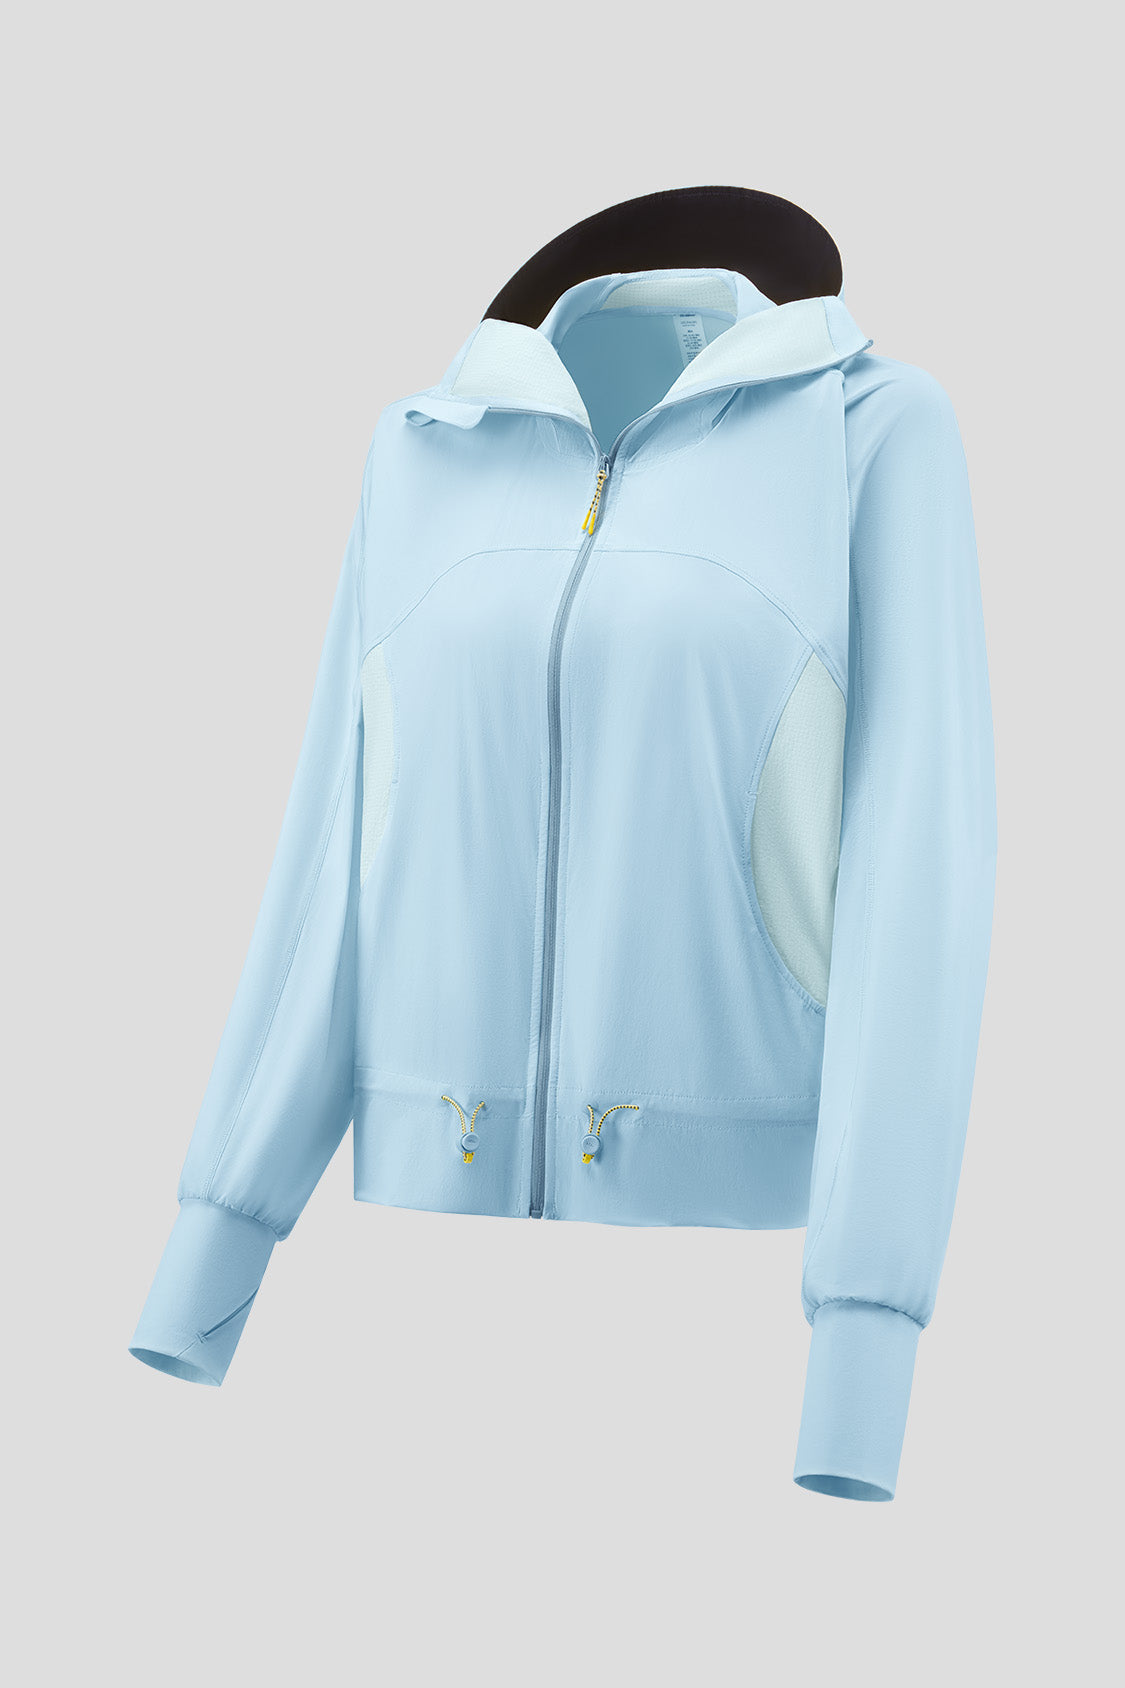 Women's Hooded Water Jacket  Jackets, Spf clothing, Women pullover